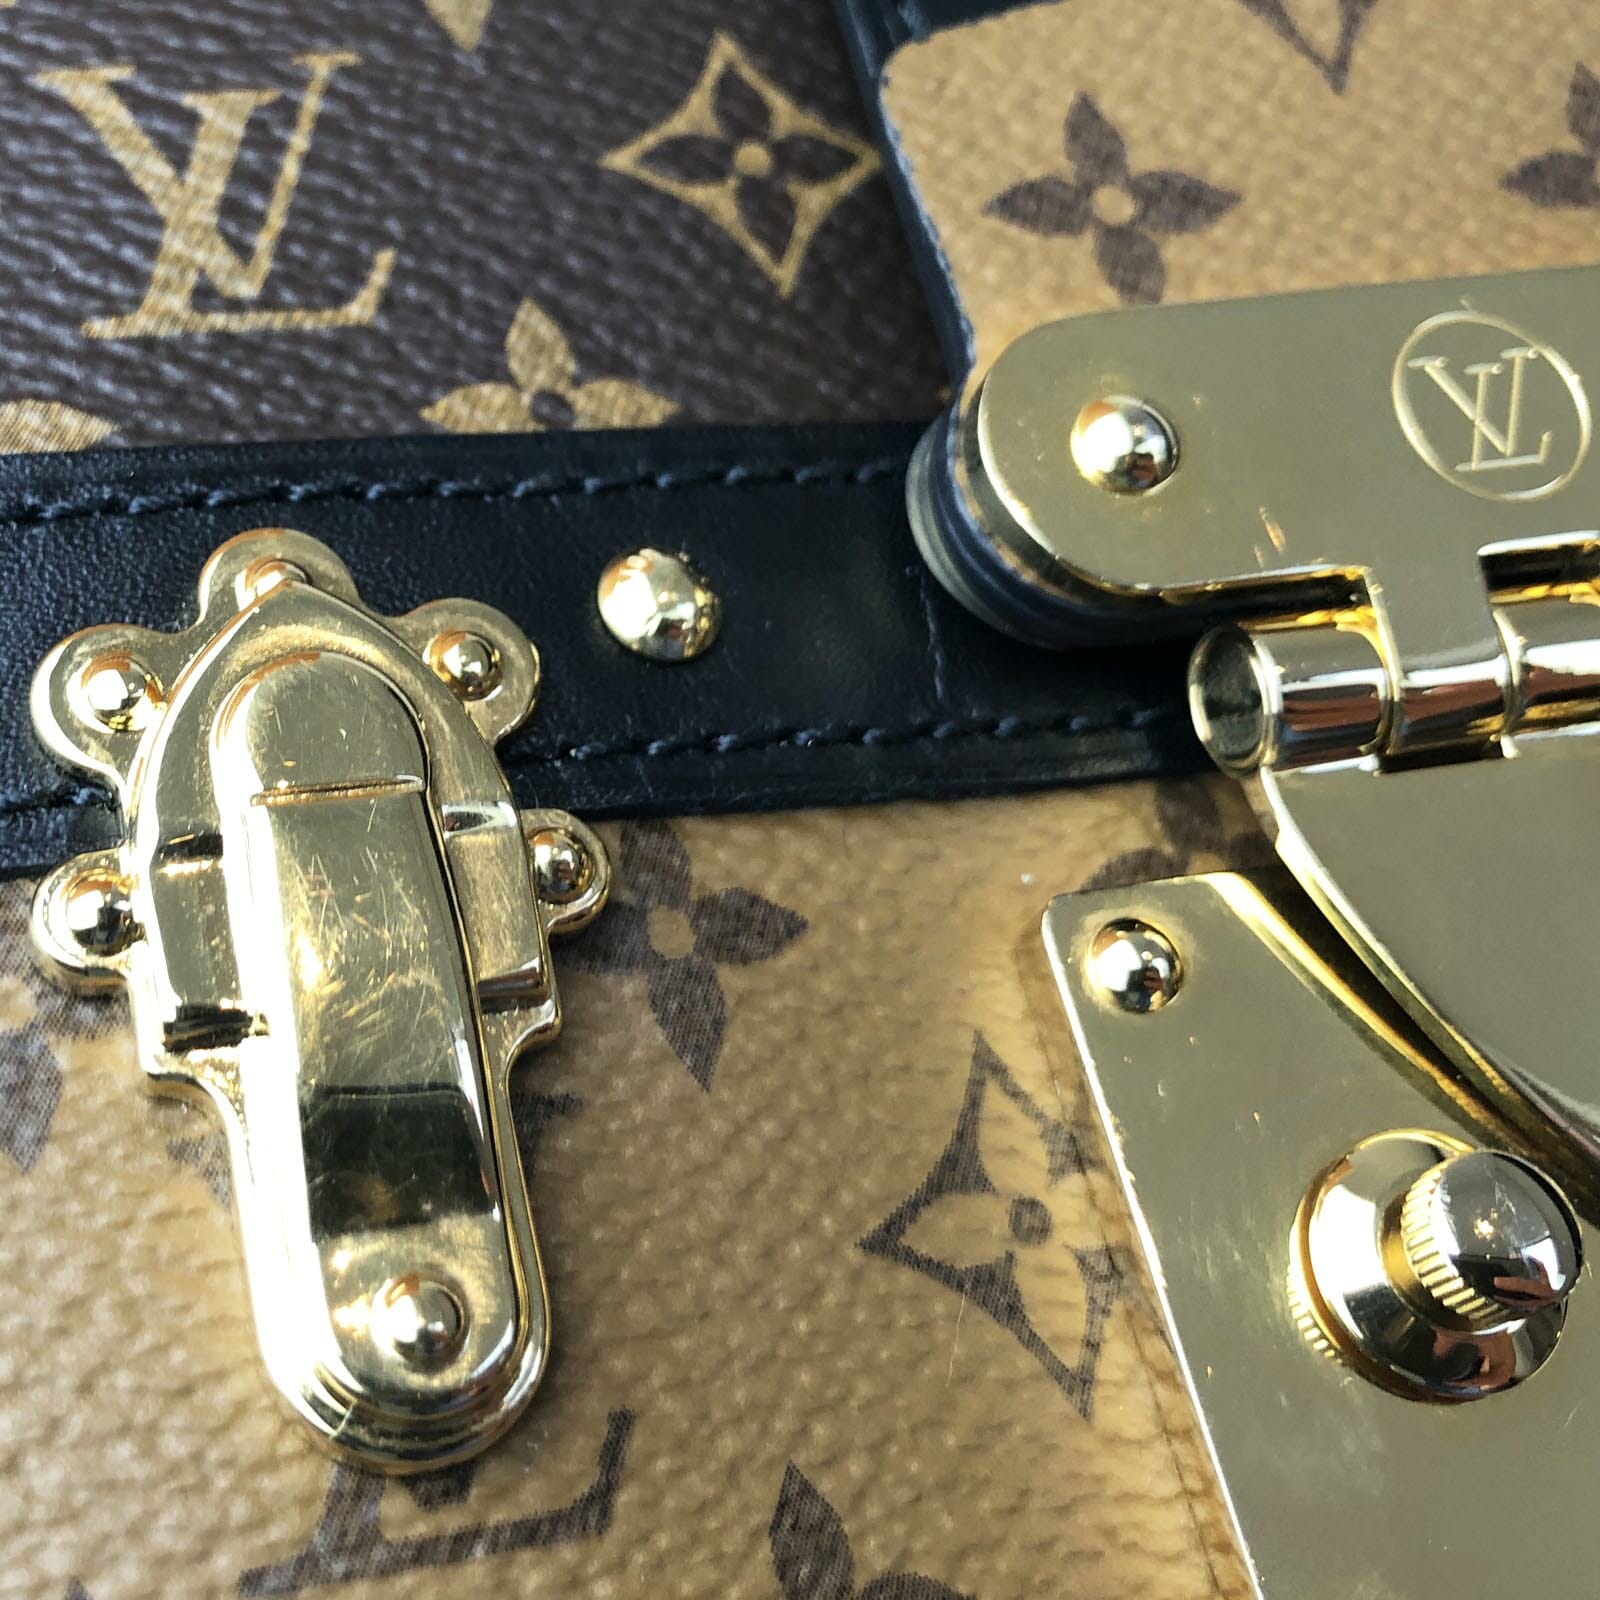 New Microchip In Louis Vuitton Bags - Everything You NEED To Know -  Handbagholic